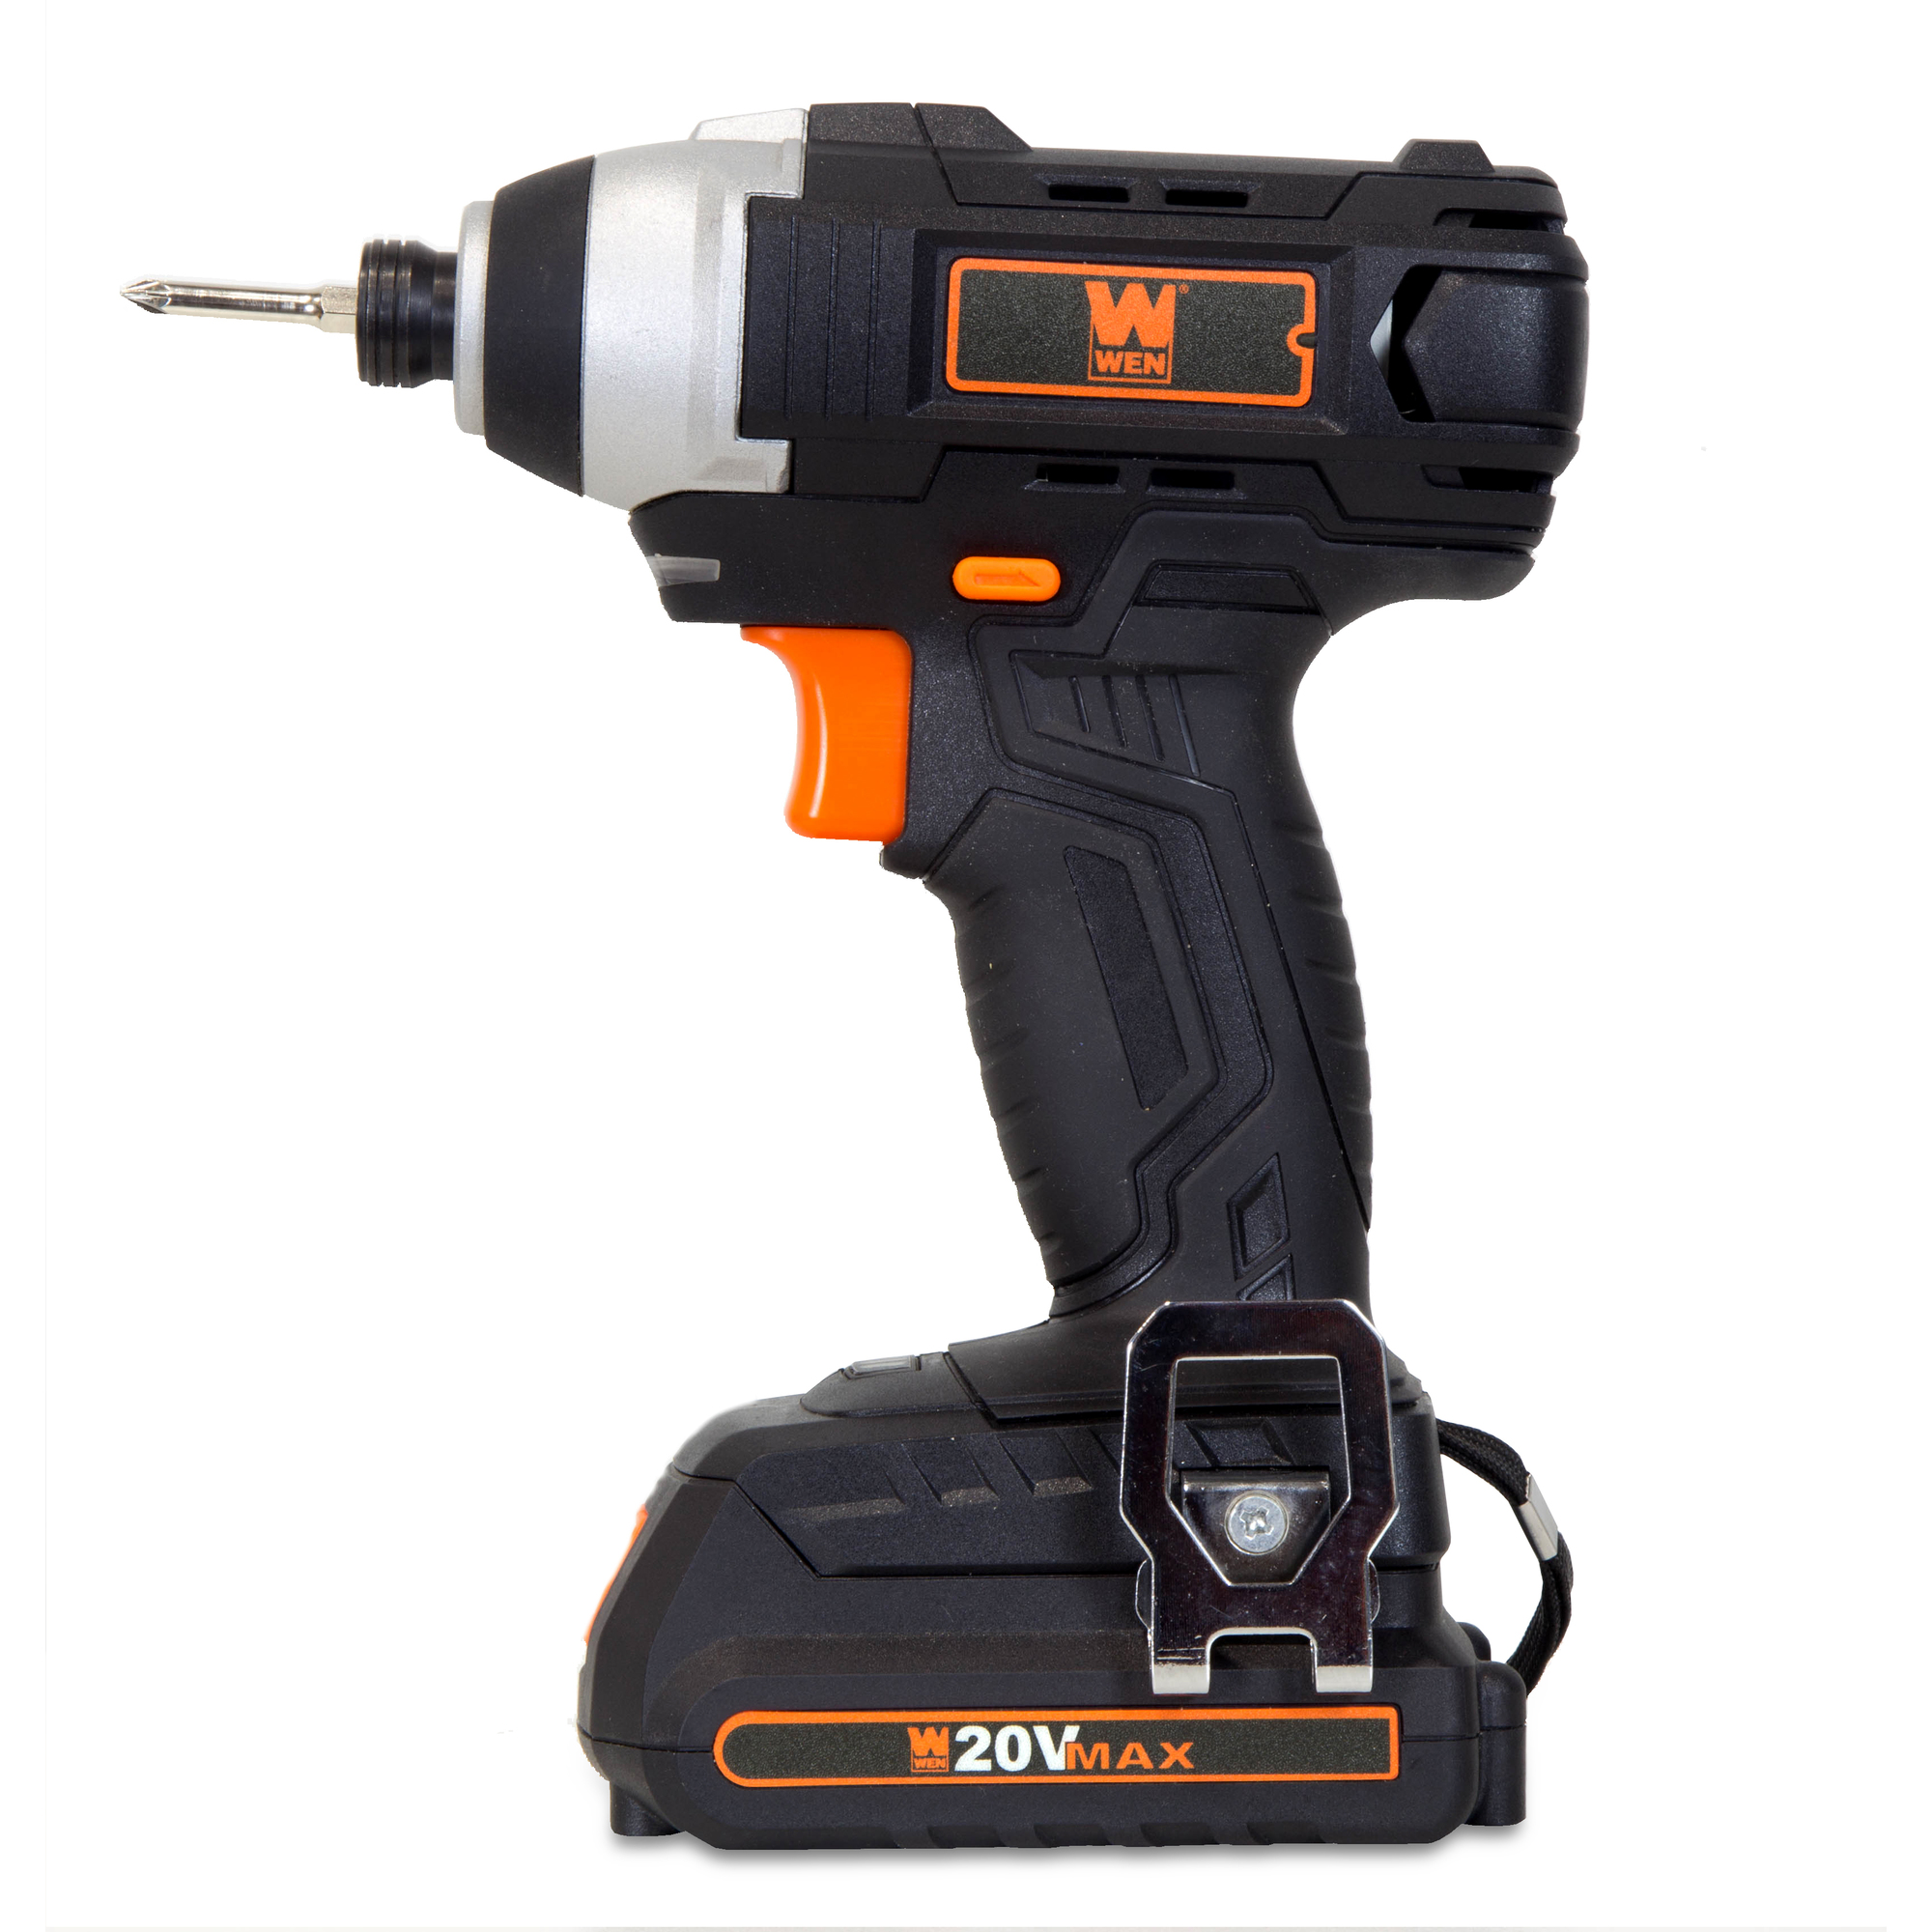 WEN, 20V Cordless 1/4Inch Impact Driver + Bat/Charger/Bits, Drive Size 1/4 in, Max. Torque 79 ft-lbs., Volts 20 Model 49135